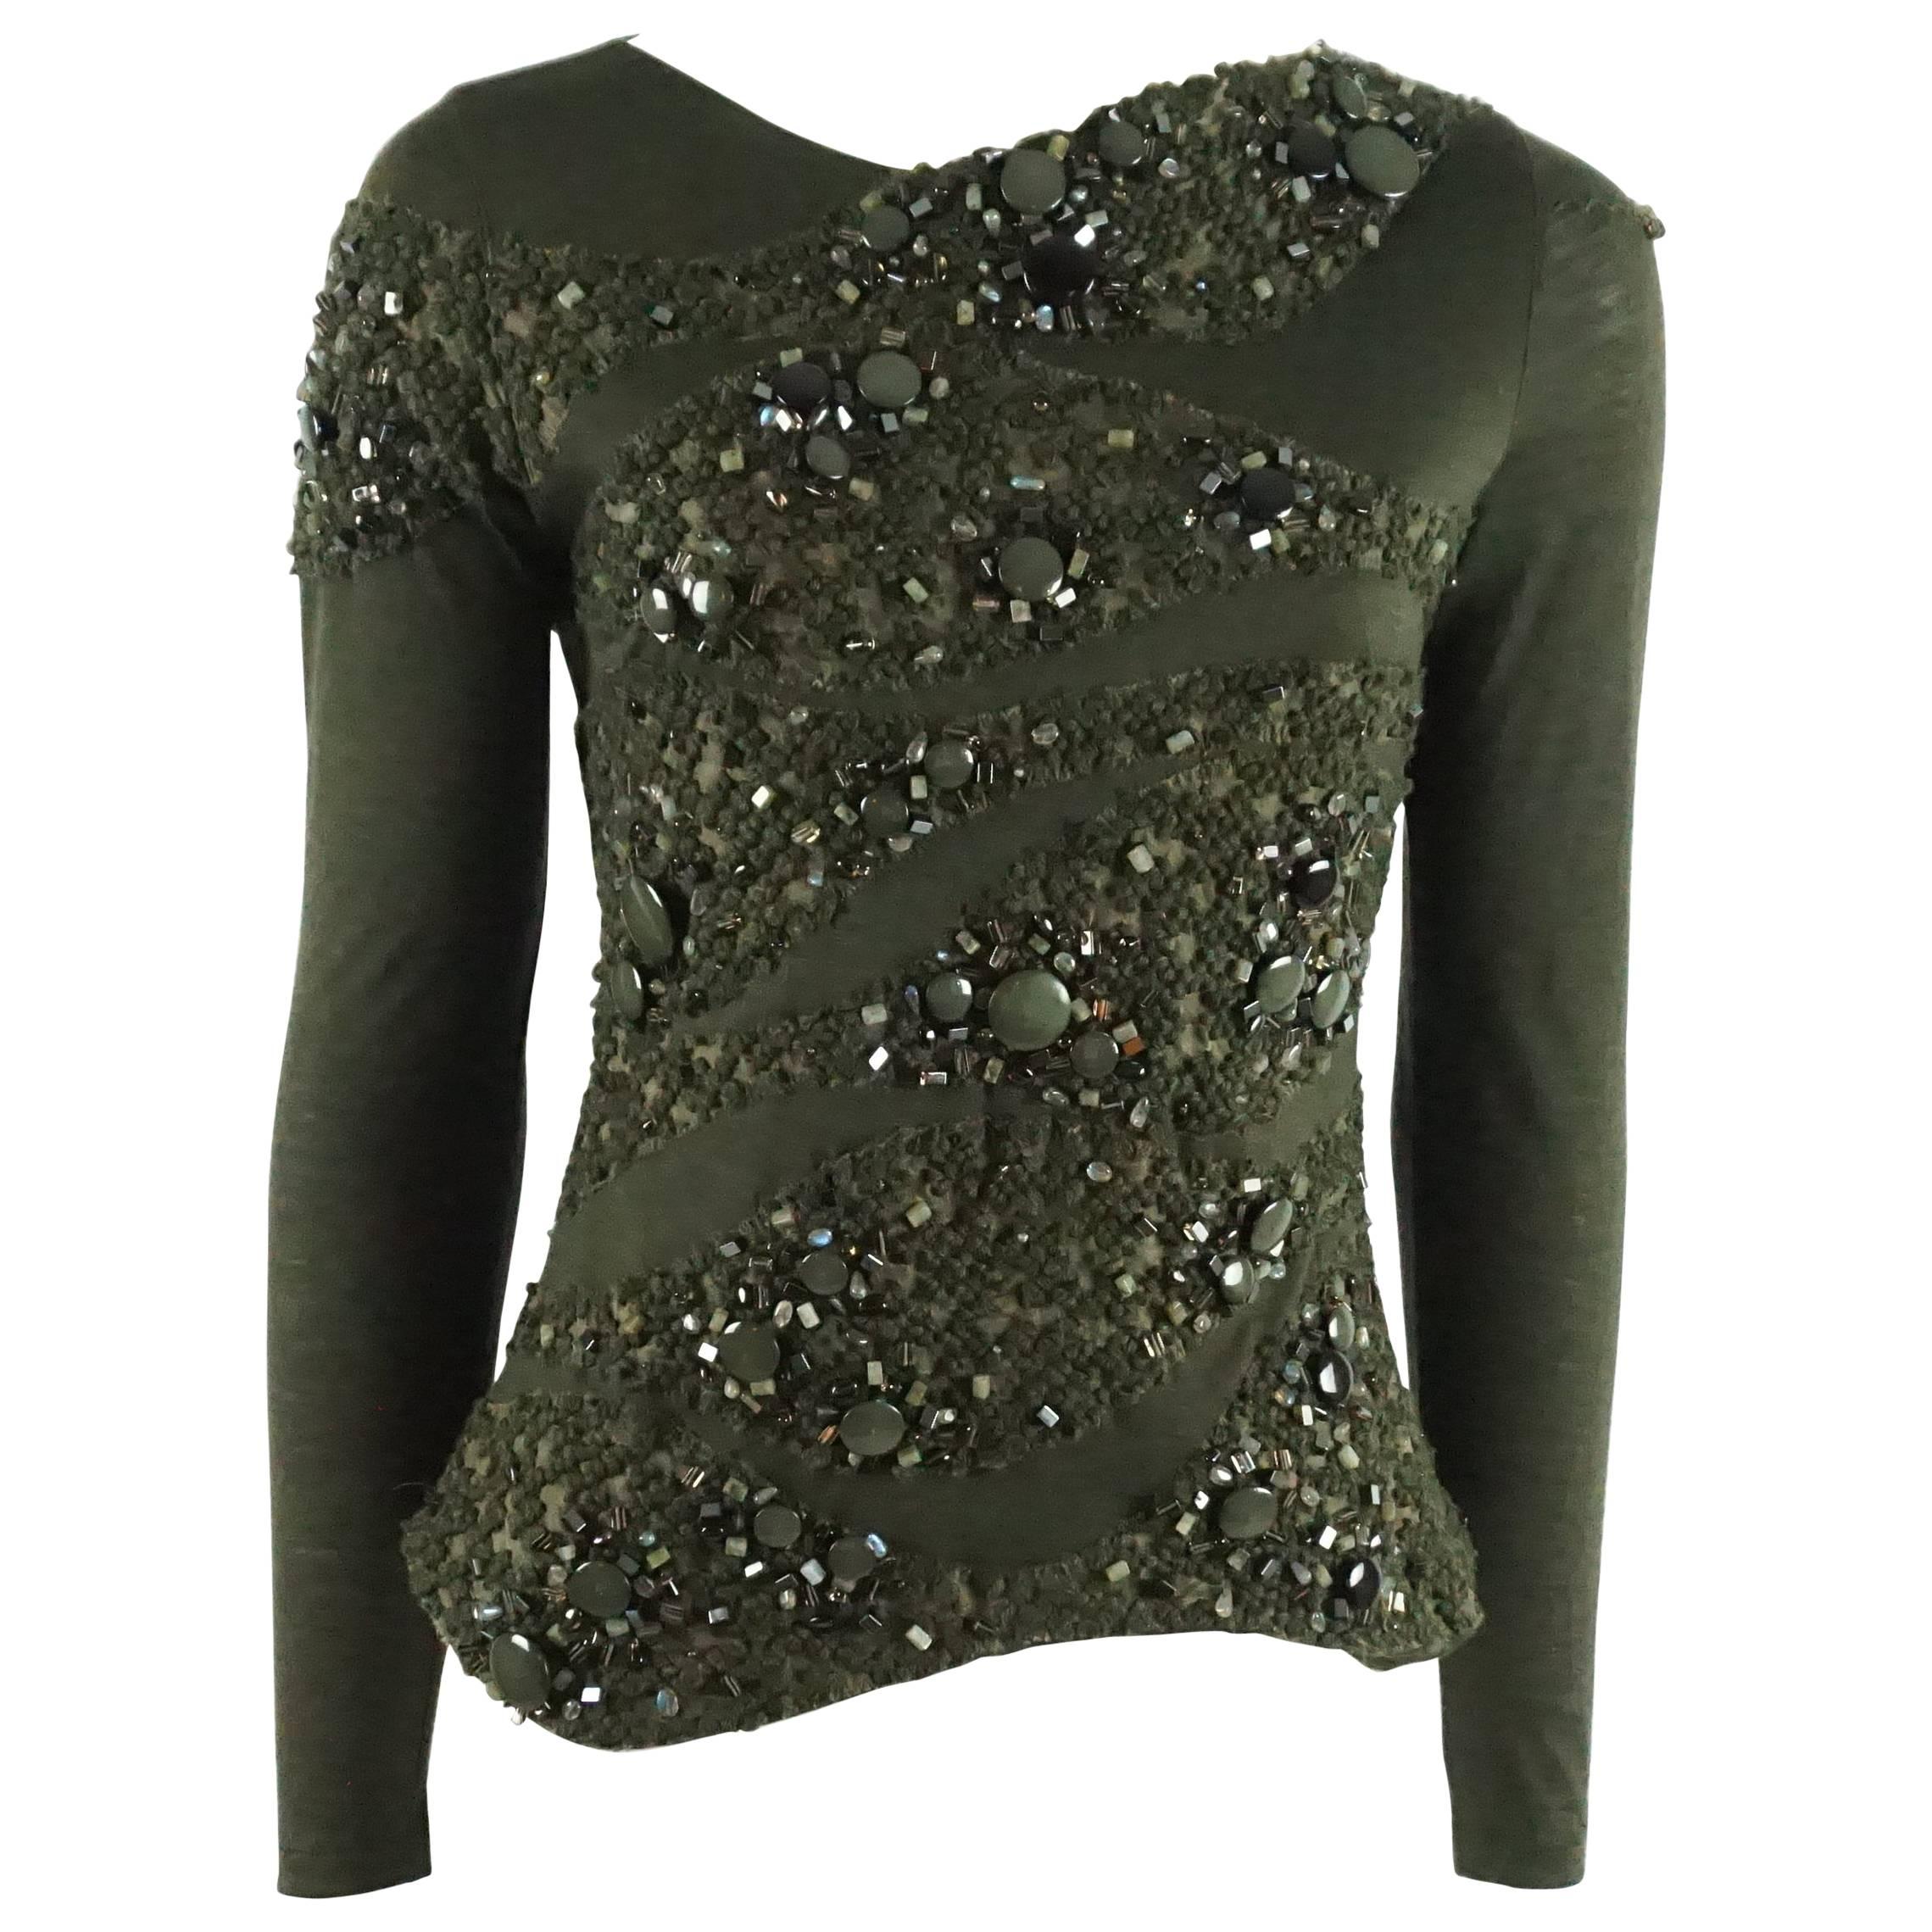 Akris Army Green Cashmere Heavily Beaded Top - 8